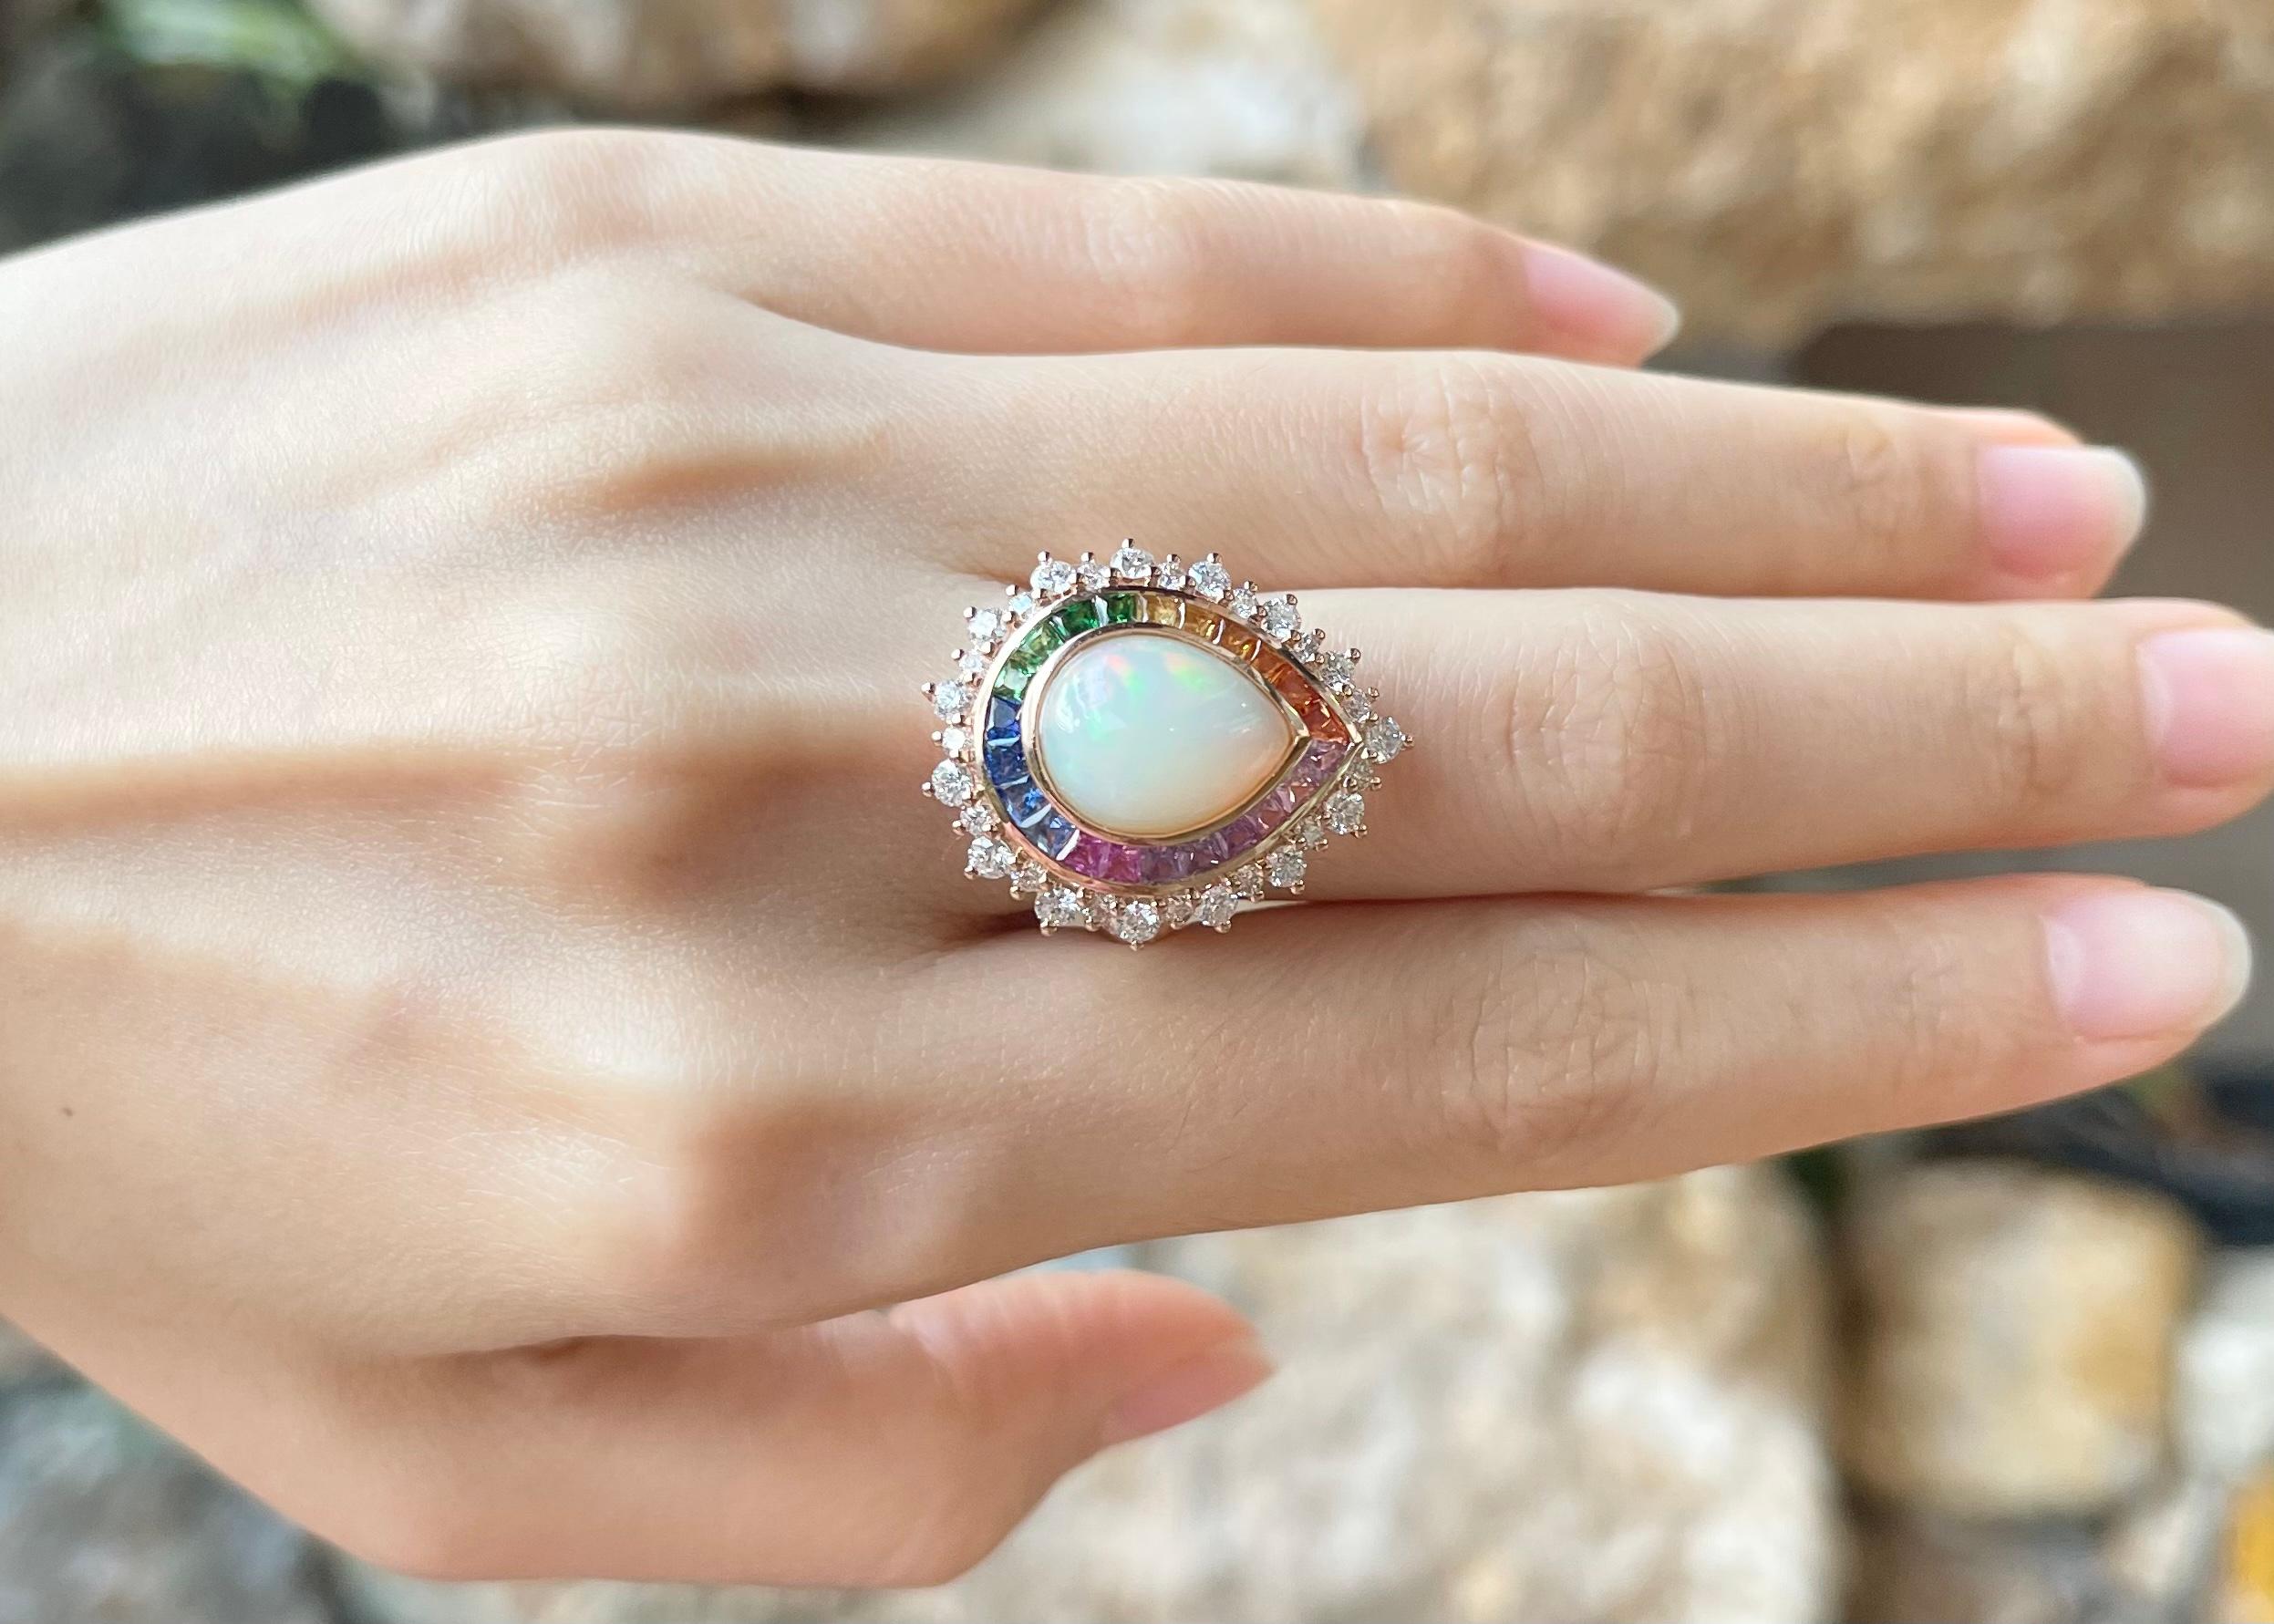 Opal 4.15 carats, Rainbow Coloured Sapphire 2.80 carats and Diamond 1.33 carats Ring set in 18K Rose Gold Settings

Width:  2.0 cm 
Length: 2.5 cm
Ring Size: 52
Total Weight: 10.44 grams

